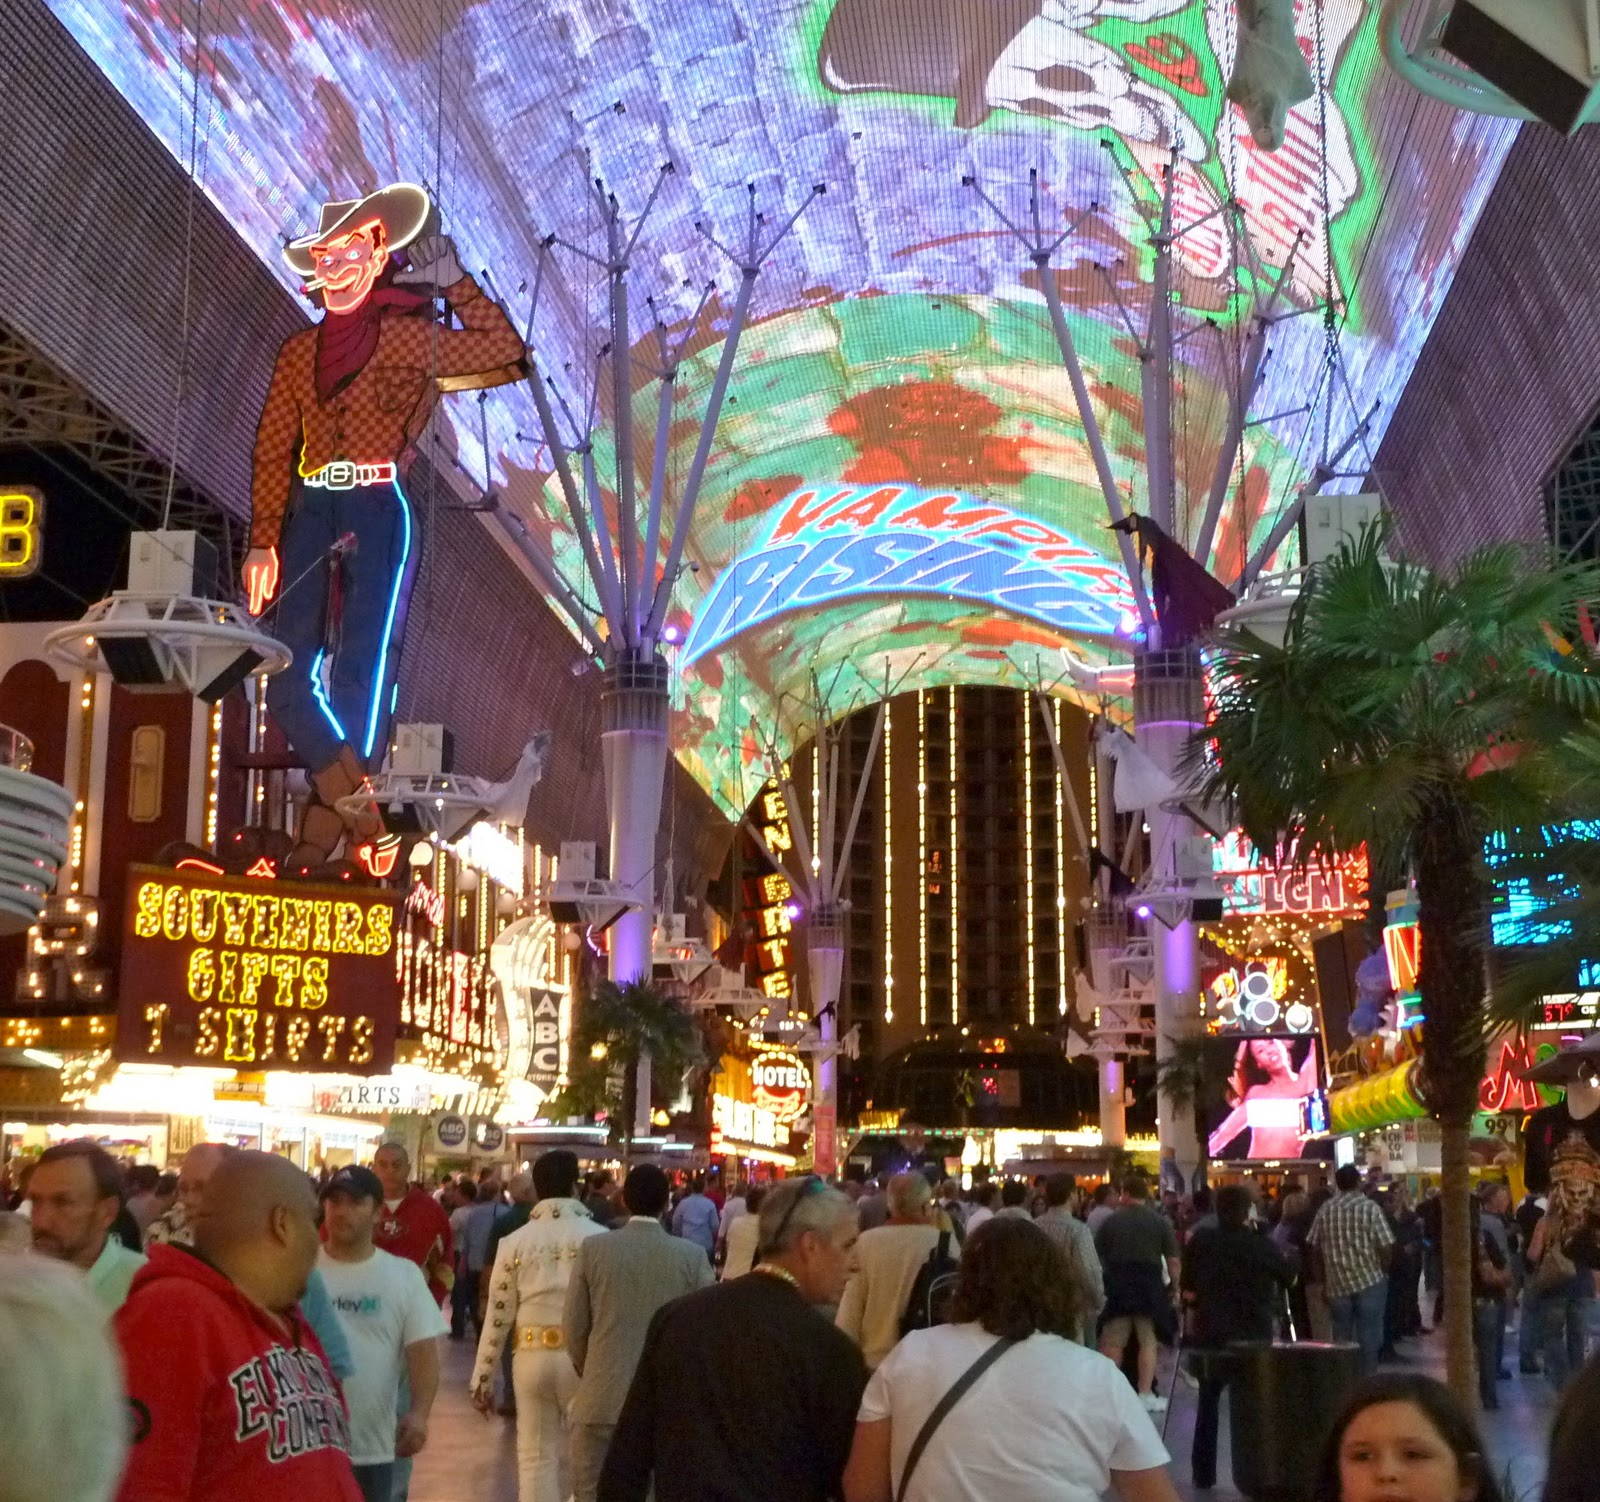 Traveling in our 5th Wheel: The Fremont Street Experience